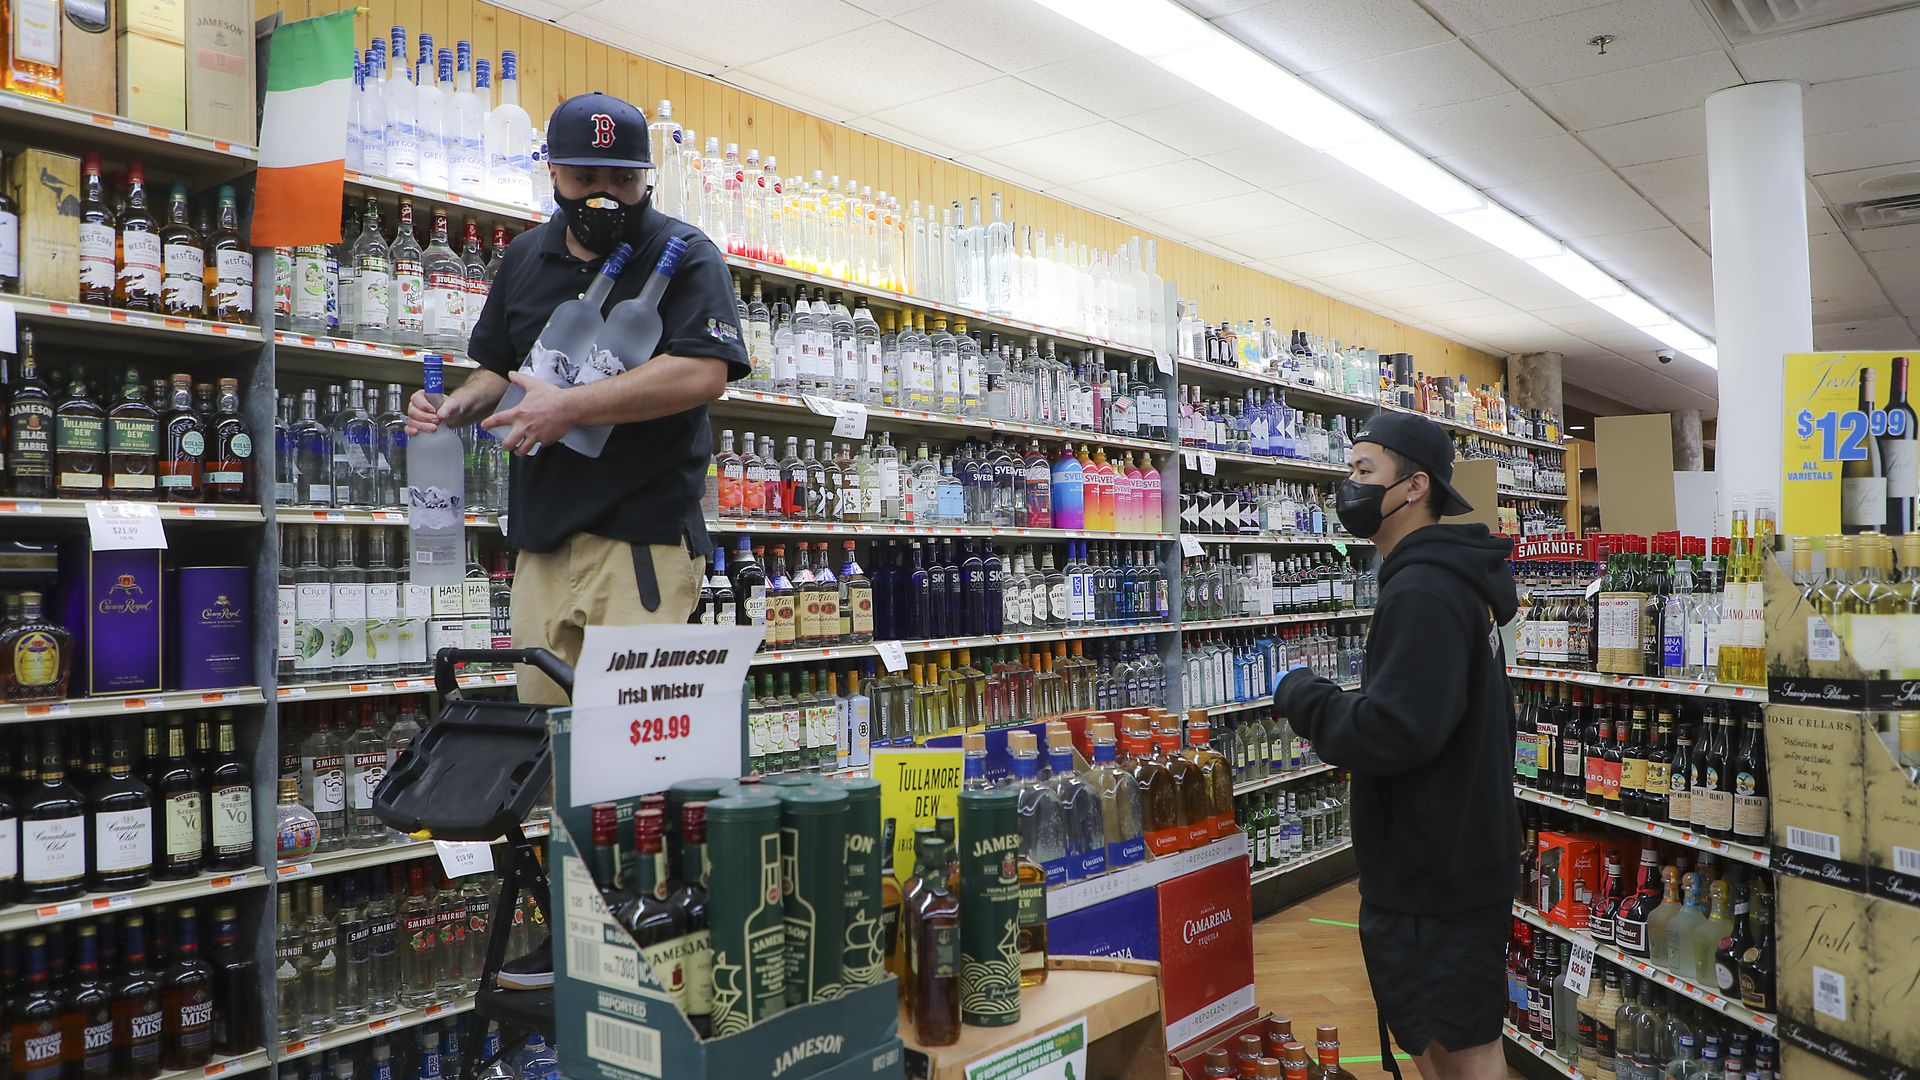 A man wearing shorts and a face mask stands near another man in a face mask, who is standing on a ladder in front of shelves of alcohol 